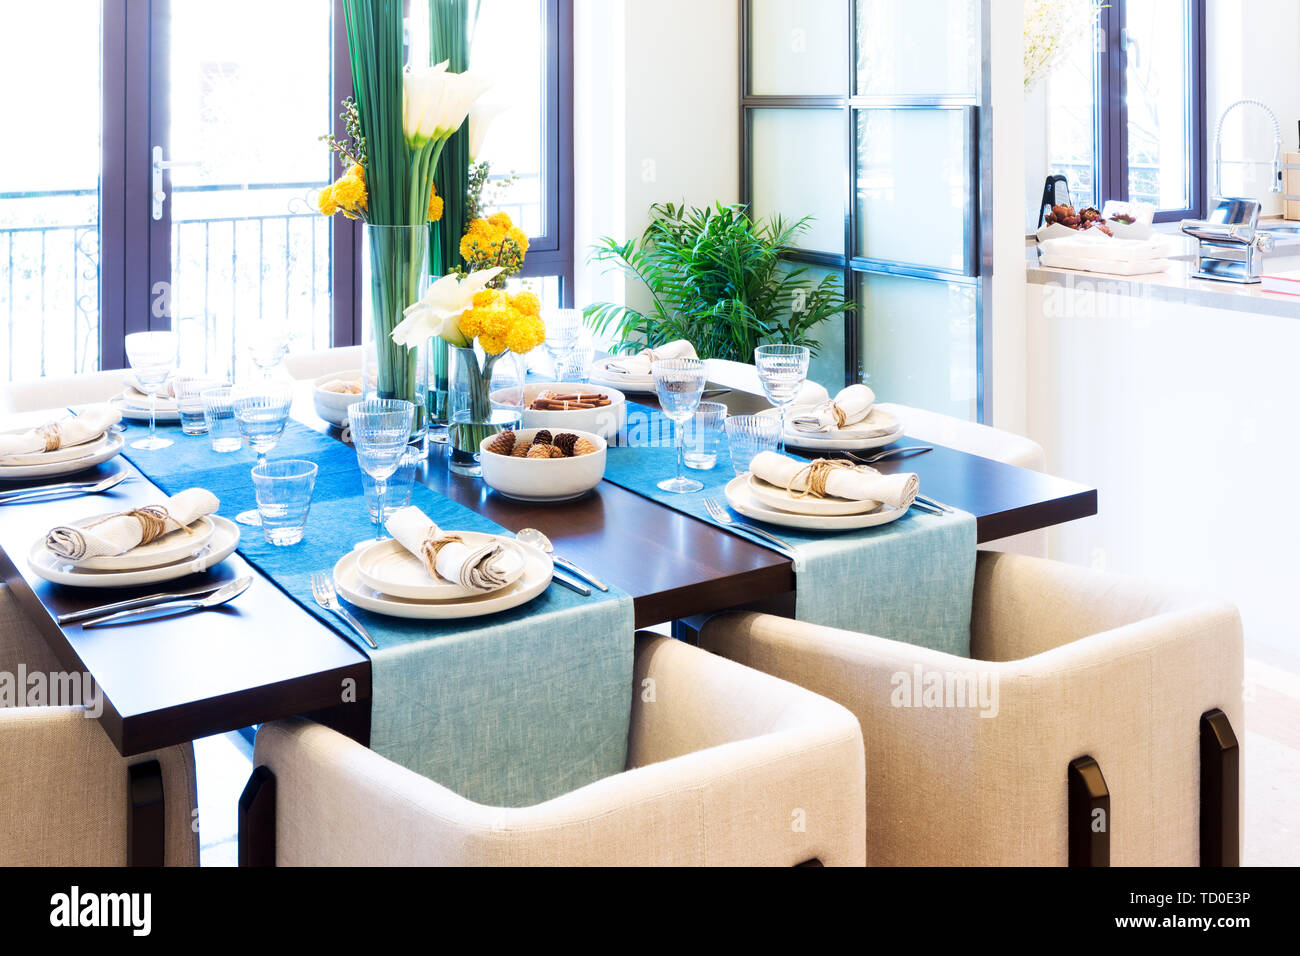 Interior of modern dining rooms Stock Photo